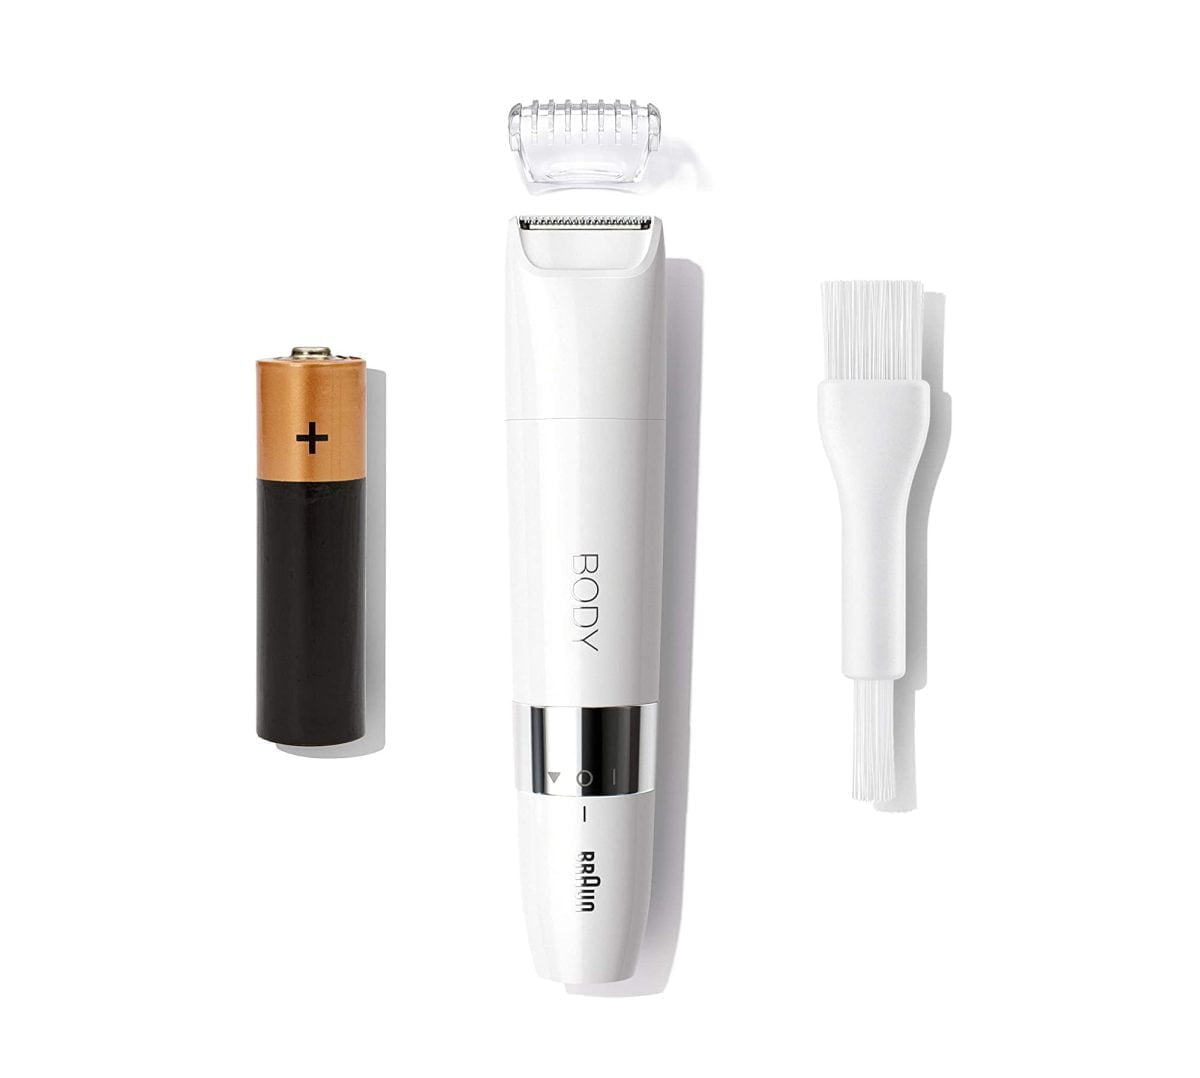 71Opwgkqwkl. Ac Sl1500 Braun &Lt;H1&Gt;Braun Body Mini Trimmer Bs1000, Electric Body Hair Removal For Women And Men, White&Lt;/H1&Gt; Https://Www.youtube.com/Watch?V=Z_Ryfvobyaw &Lt;Ul Class=&Quot;A-Unordered-List A-Vertical A-Spacing-Mini&Quot;&Gt; &Lt;Li&Gt;&Lt;Span Class=&Quot;A-List-Item&Quot;&Gt; Quick &Amp; Easy: Mini-Sized For Portability - Efficient Body Hair Removal &Lt;/Span&Gt;&Lt;/Li&Gt; &Lt;Li&Gt;&Lt;Span Class=&Quot;A-List-Item&Quot;&Gt; Gentle &Amp; Compact: Built For Efficient And Sensitive Body Hair T For Everybody &Lt;/Span&Gt;&Lt;/Li&Gt; &Lt;Li&Gt;&Lt;Span Class=&Quot;A-List-Item&Quot;&Gt; Wet &Amp; Dry: 100% Waterproof, For Use As You Prefer &Lt;/Span&Gt;&Lt;/Li&Gt; &Lt;Li&Gt;&Lt;Span Class=&Quot;A-List-Item&Quot;&Gt; Precise: German Cutting Technology For Precise Body Hair T And Shaping &Lt;/Span&Gt;&Lt;/Li&Gt; &Lt;Li&Gt;&Lt;Span Class=&Quot;A-List-Item&Quot;&Gt; Multipurpose: Usable For Hair Removal T And Shaping On Different Areas Of Your Body &Lt;/Span&Gt;&Lt;/Li&Gt; &Lt;/Ul&Gt; Body Hair Removal Braun Body Mini Trimmer Bs1000, Electric Body Hair Removal For Women And Men, White